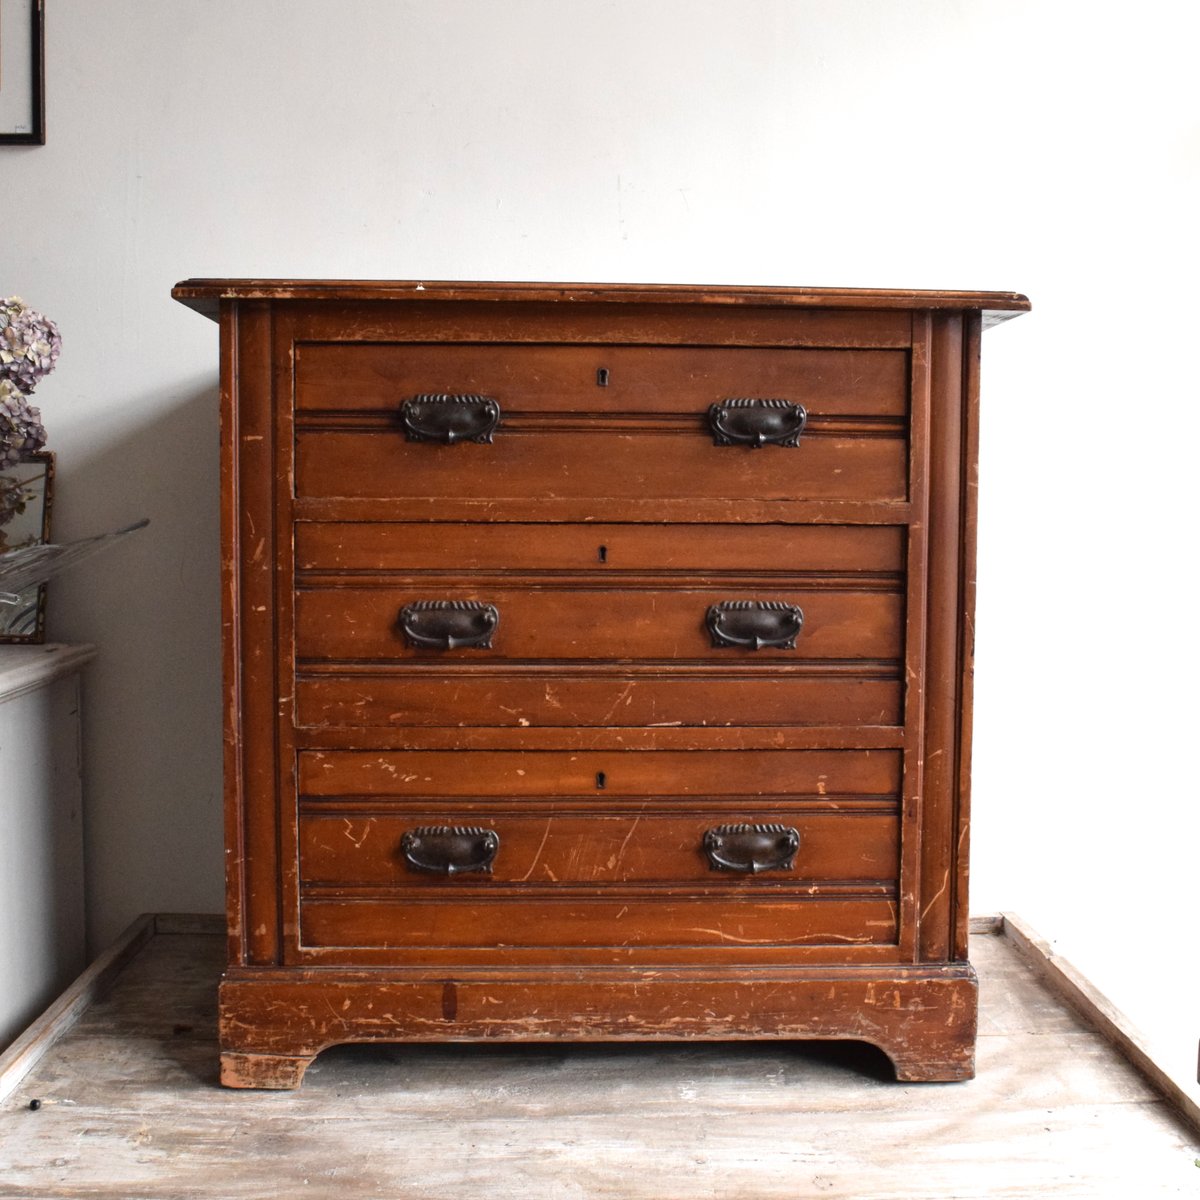 Vintage Wooden Chest of Drawers, 1900s for sale at Pamono